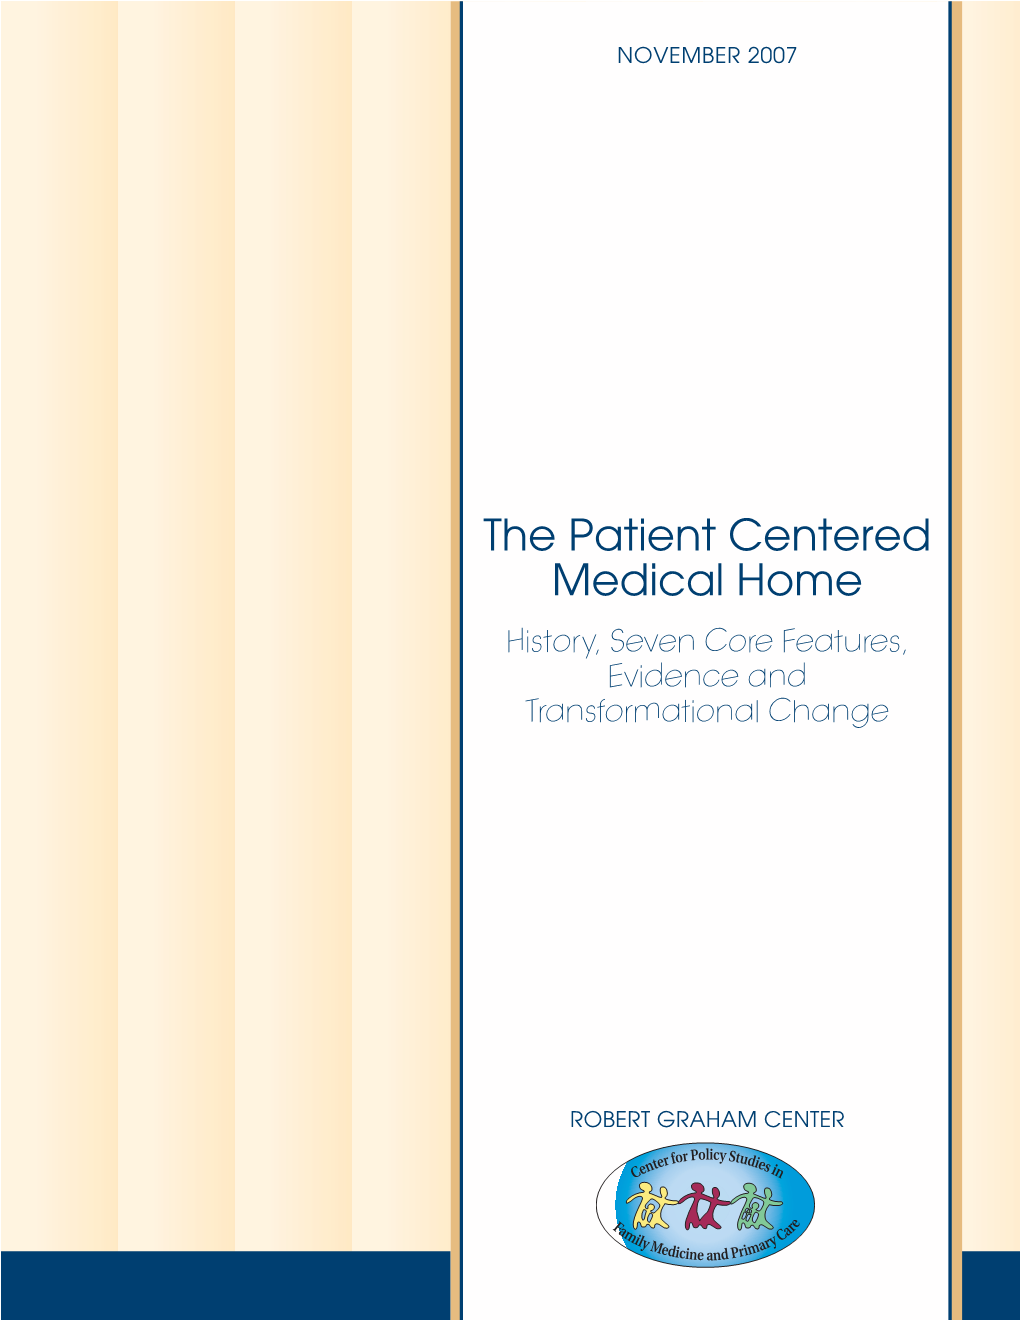 The Patient Centered Medical Home History, Seven Core Features, Evidence and Transformational Change